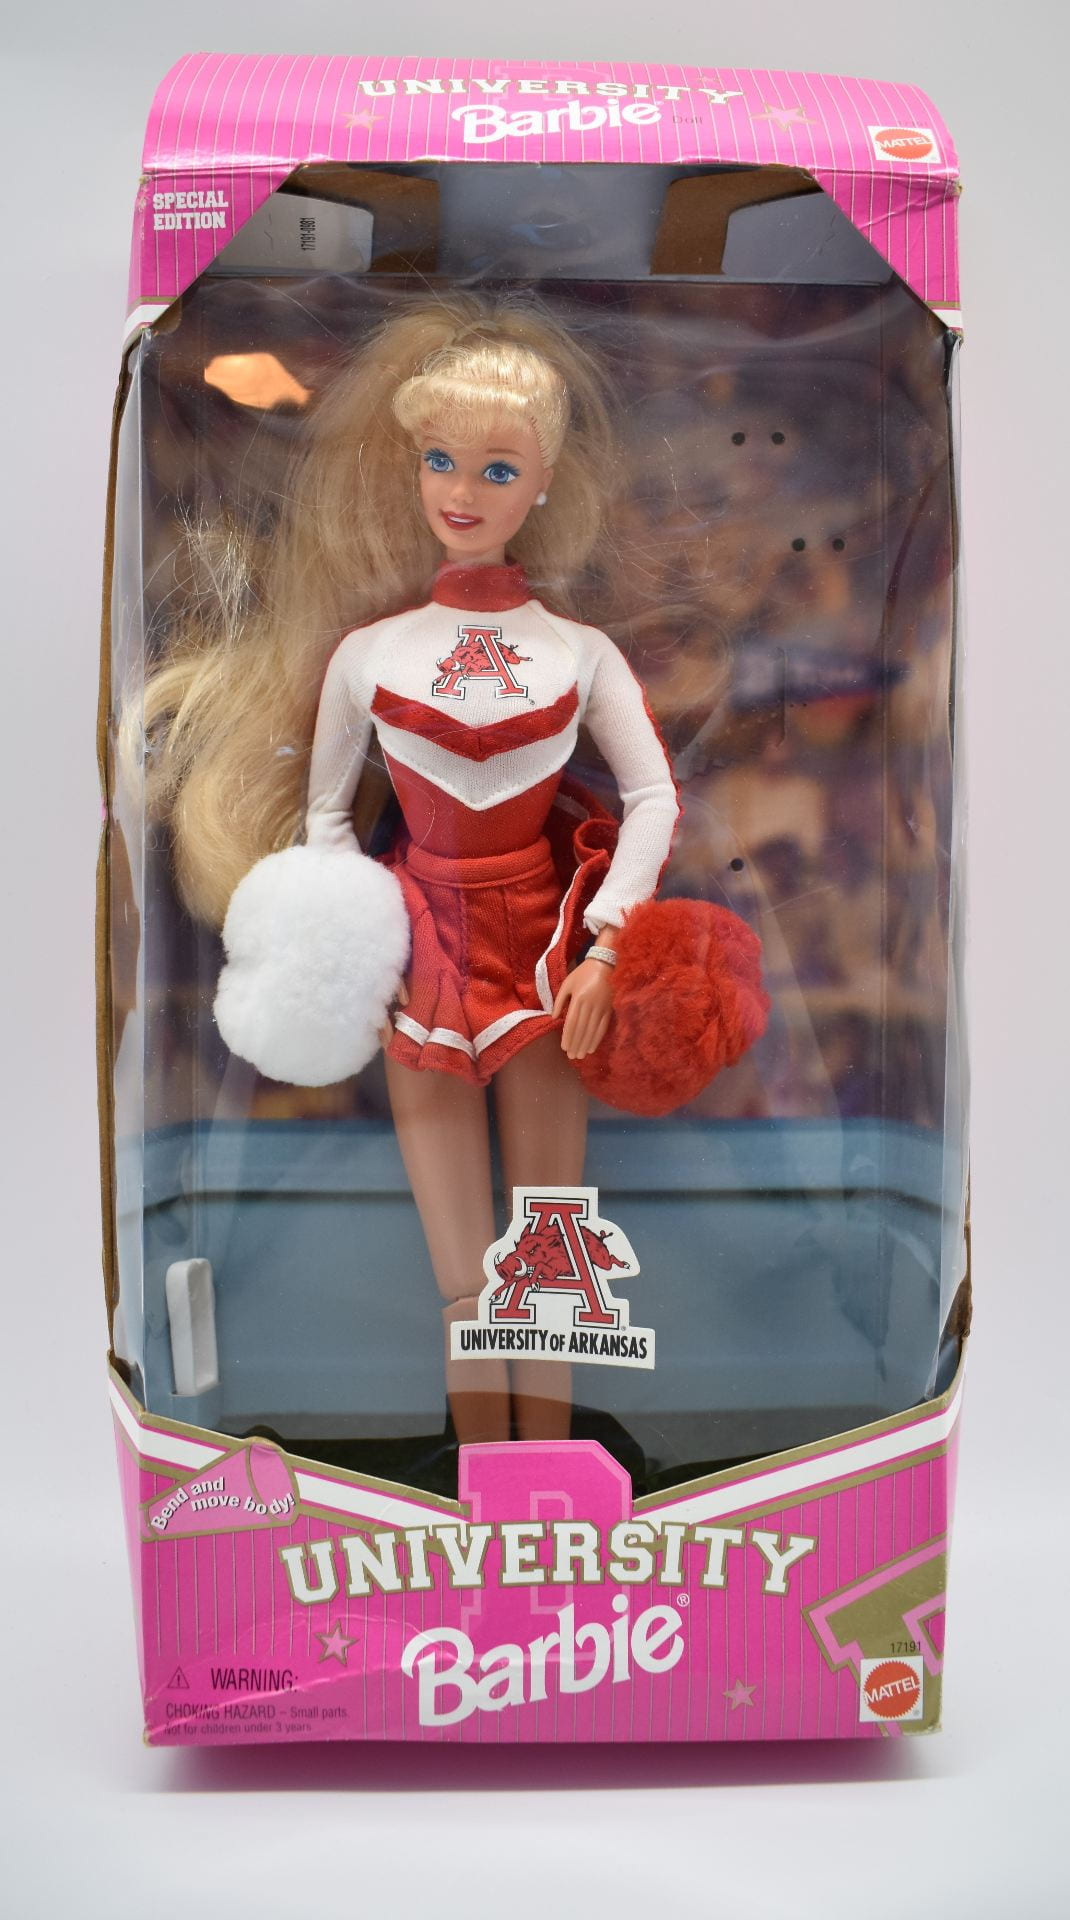 A pink box with a clear front that features a Barbie in a Razorback cheerleader uniform. At the bottom of the box, there is a label that says "University Barbie."